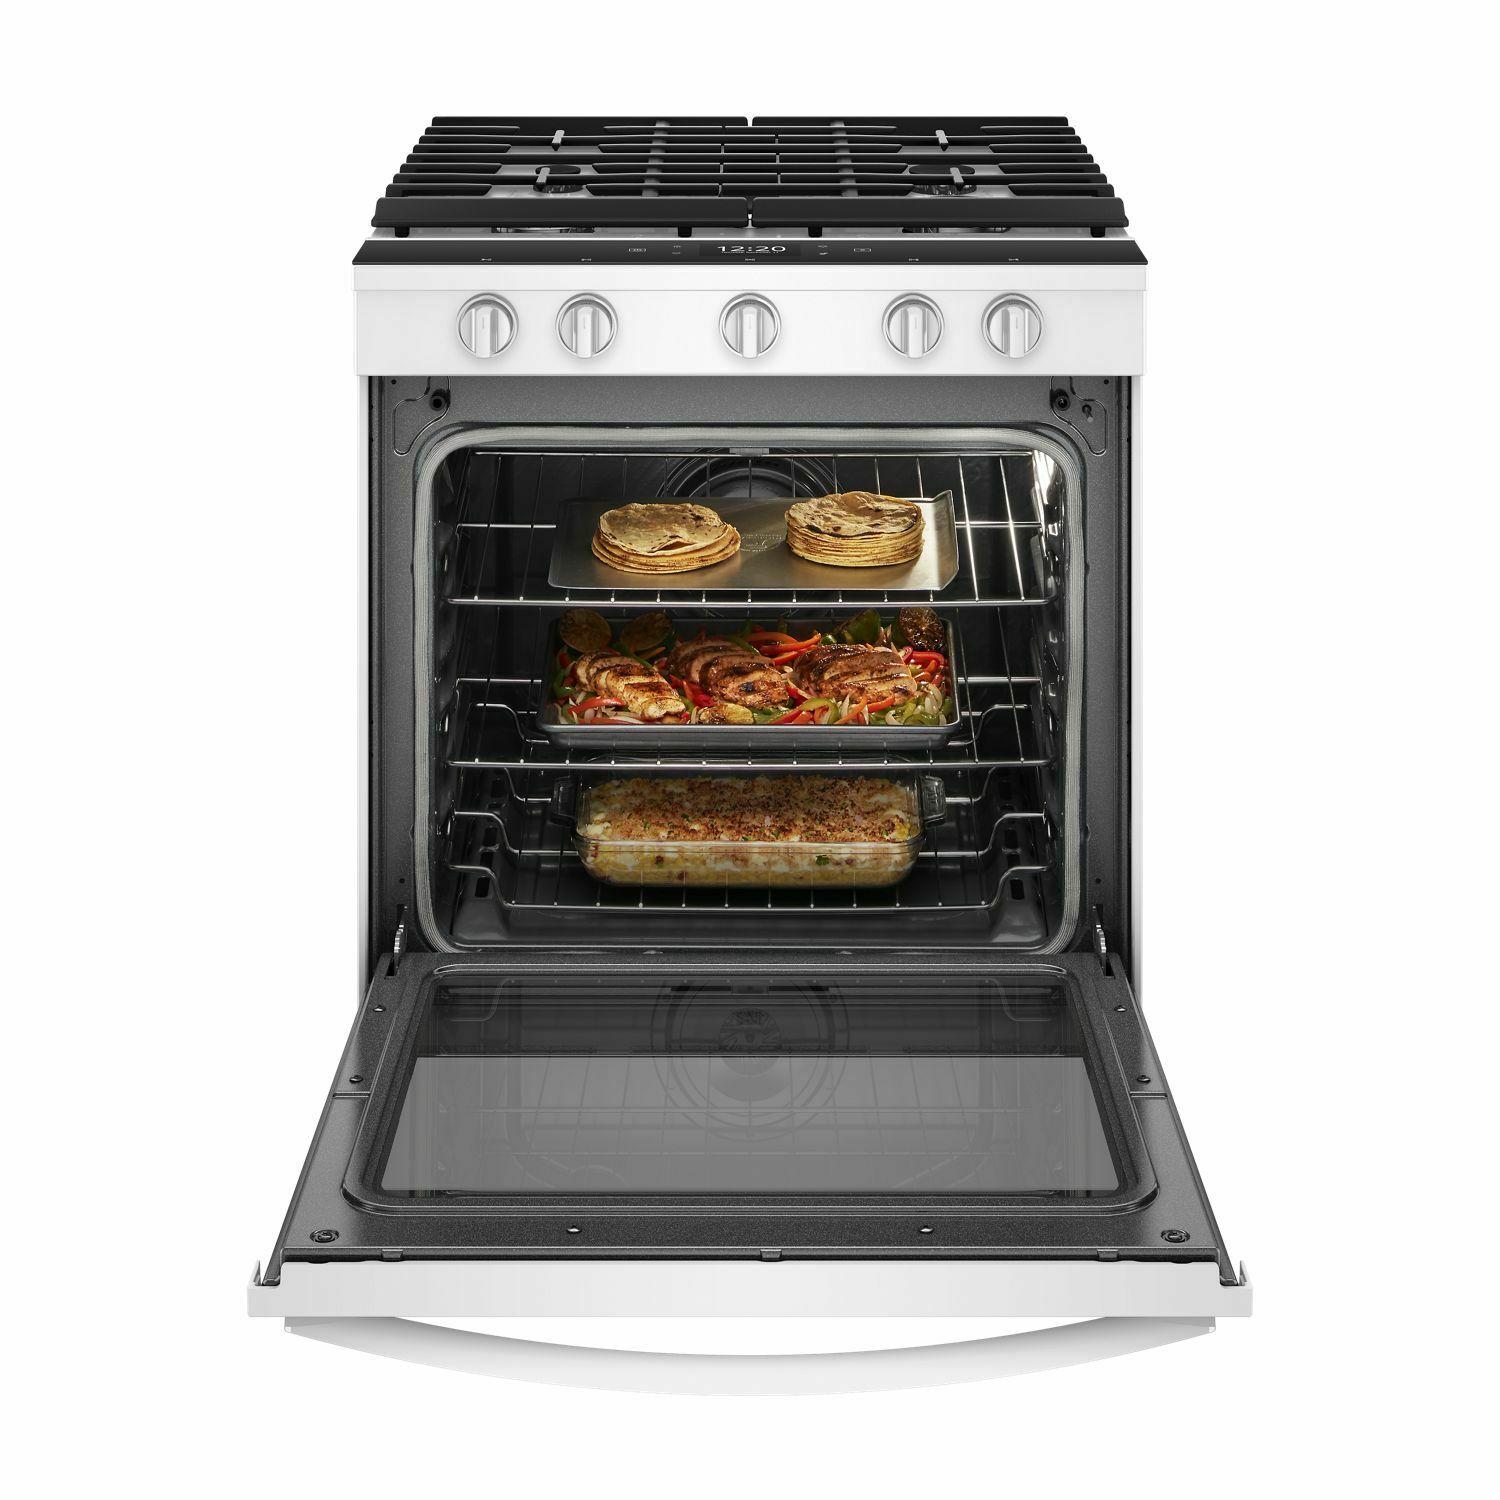 Whirlpool 5.8 cu. ft. Smart Slide-in Gas Range with Air Fry, when Connected